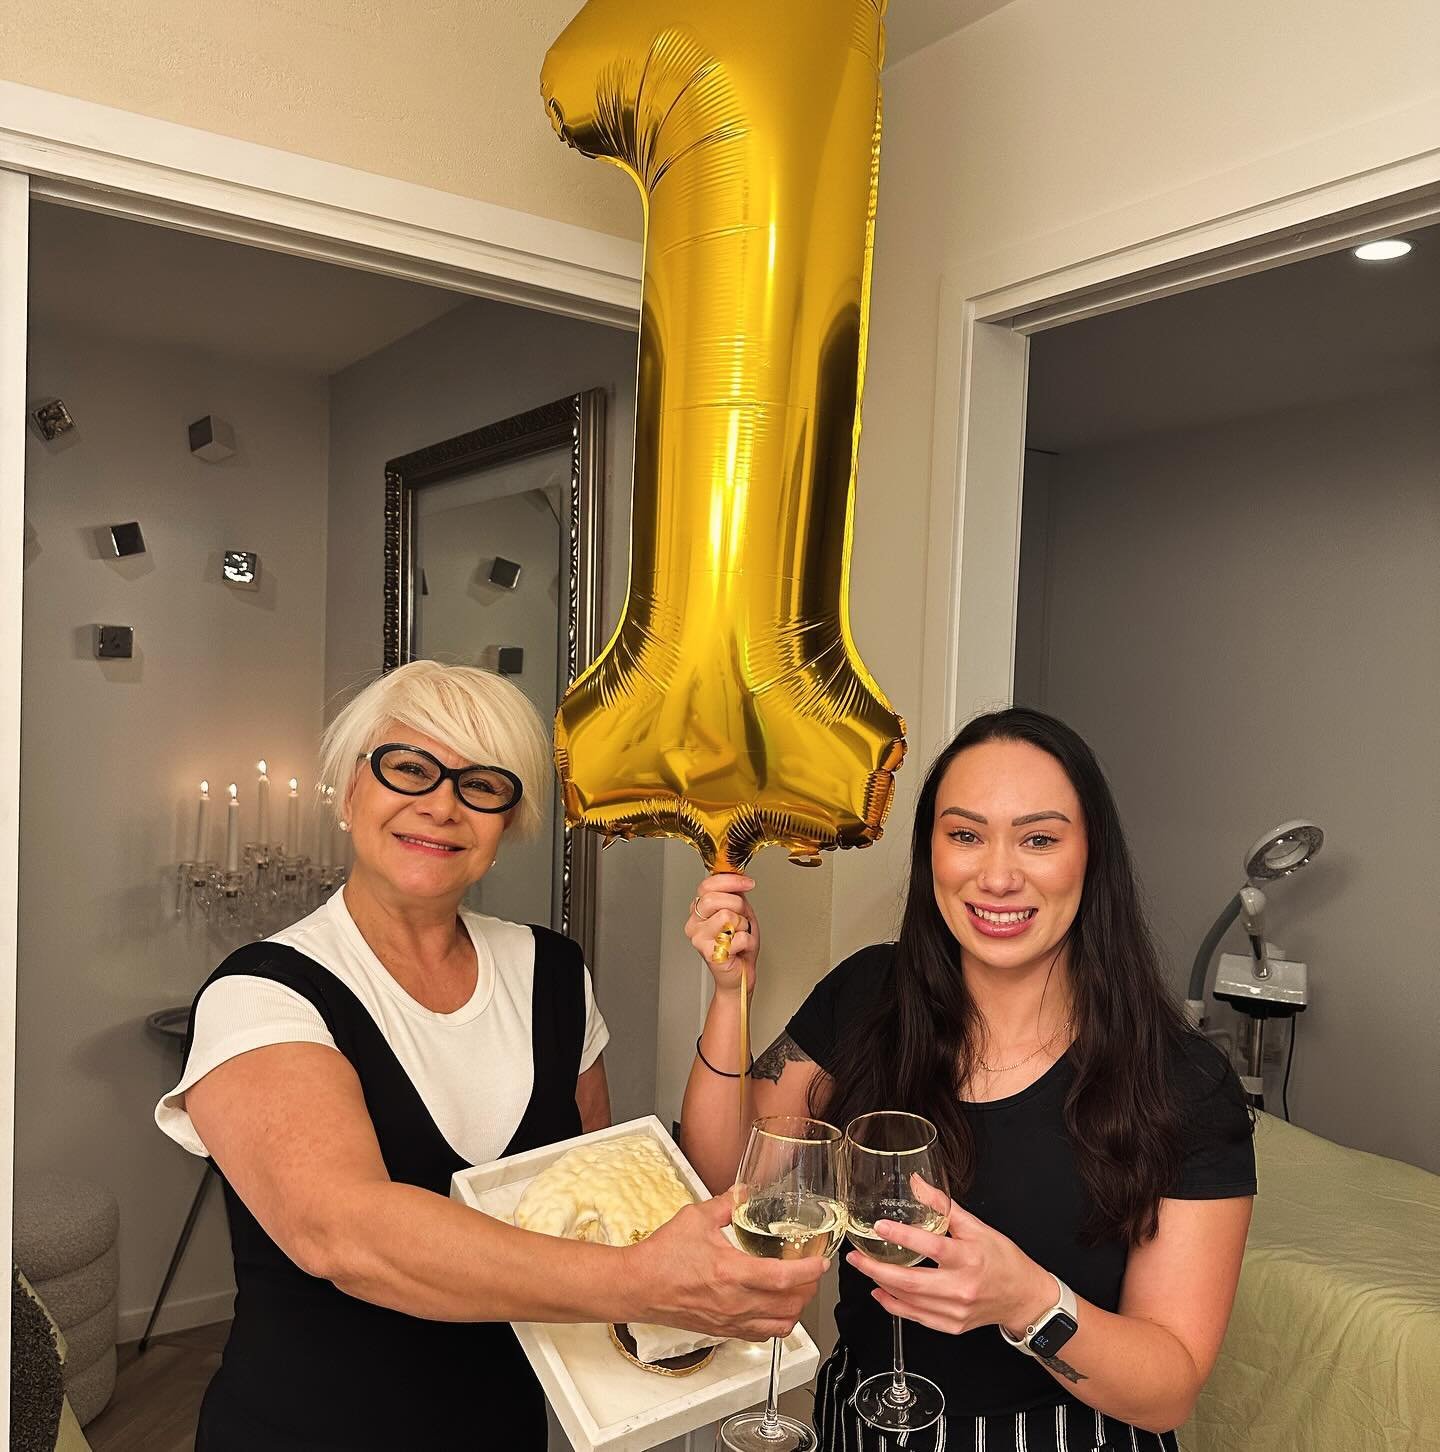 🎂🎉Happy 1st Birthday to Saint Alicia Day Spa!🥳🍾 

What a year it&rsquo;s been! From humble beginnings to this incredible milestone, we&rsquo;re filled with gratitude for each and every one of you who has been a part of our journey!

Starting from